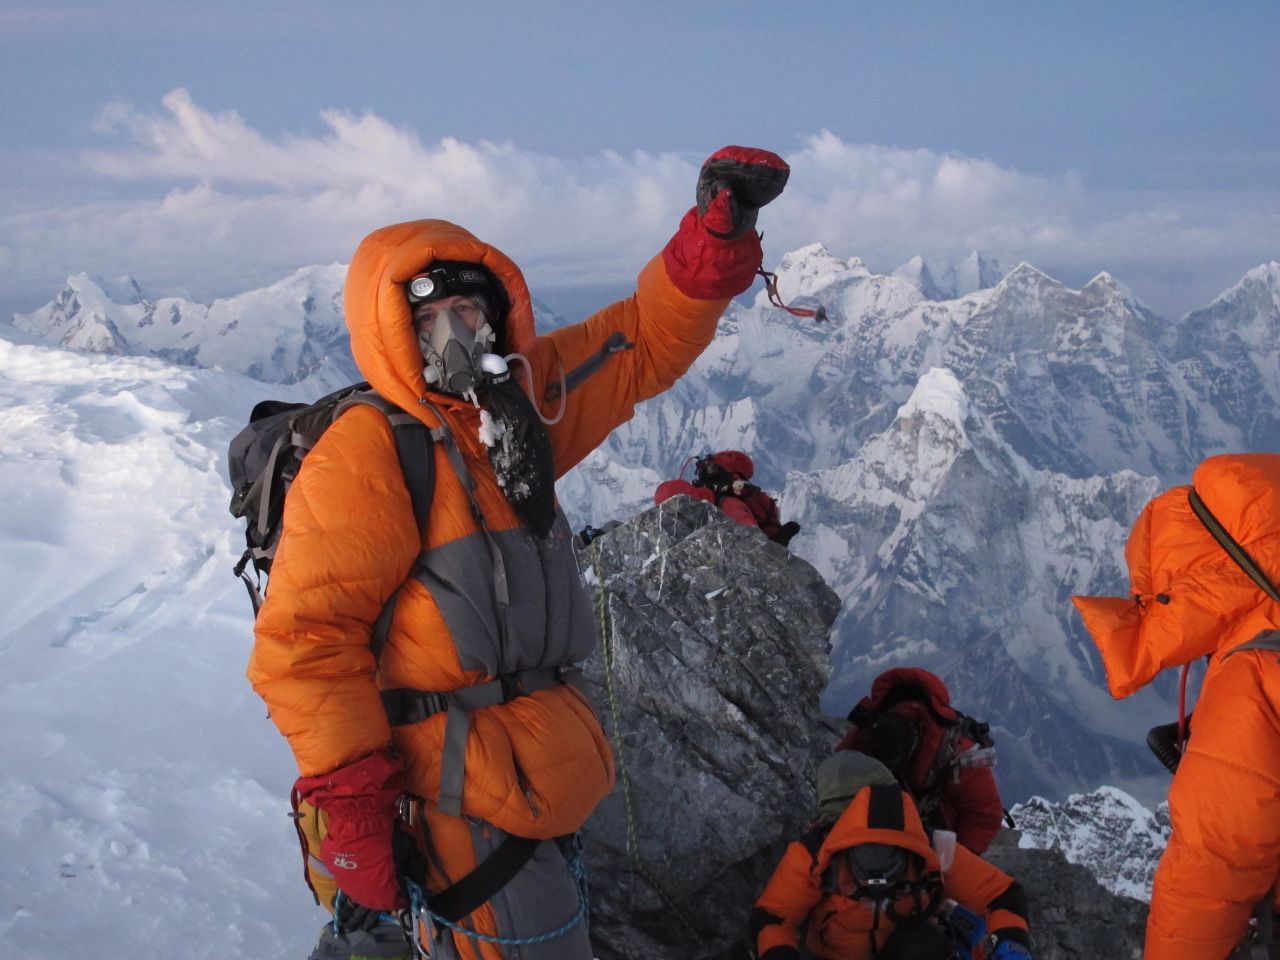 Fellow climber Sandra LeDuc captured this photo of a triumphant and relieved Kedrowski reaching the summit of Mount Everest on May 26, 2012.